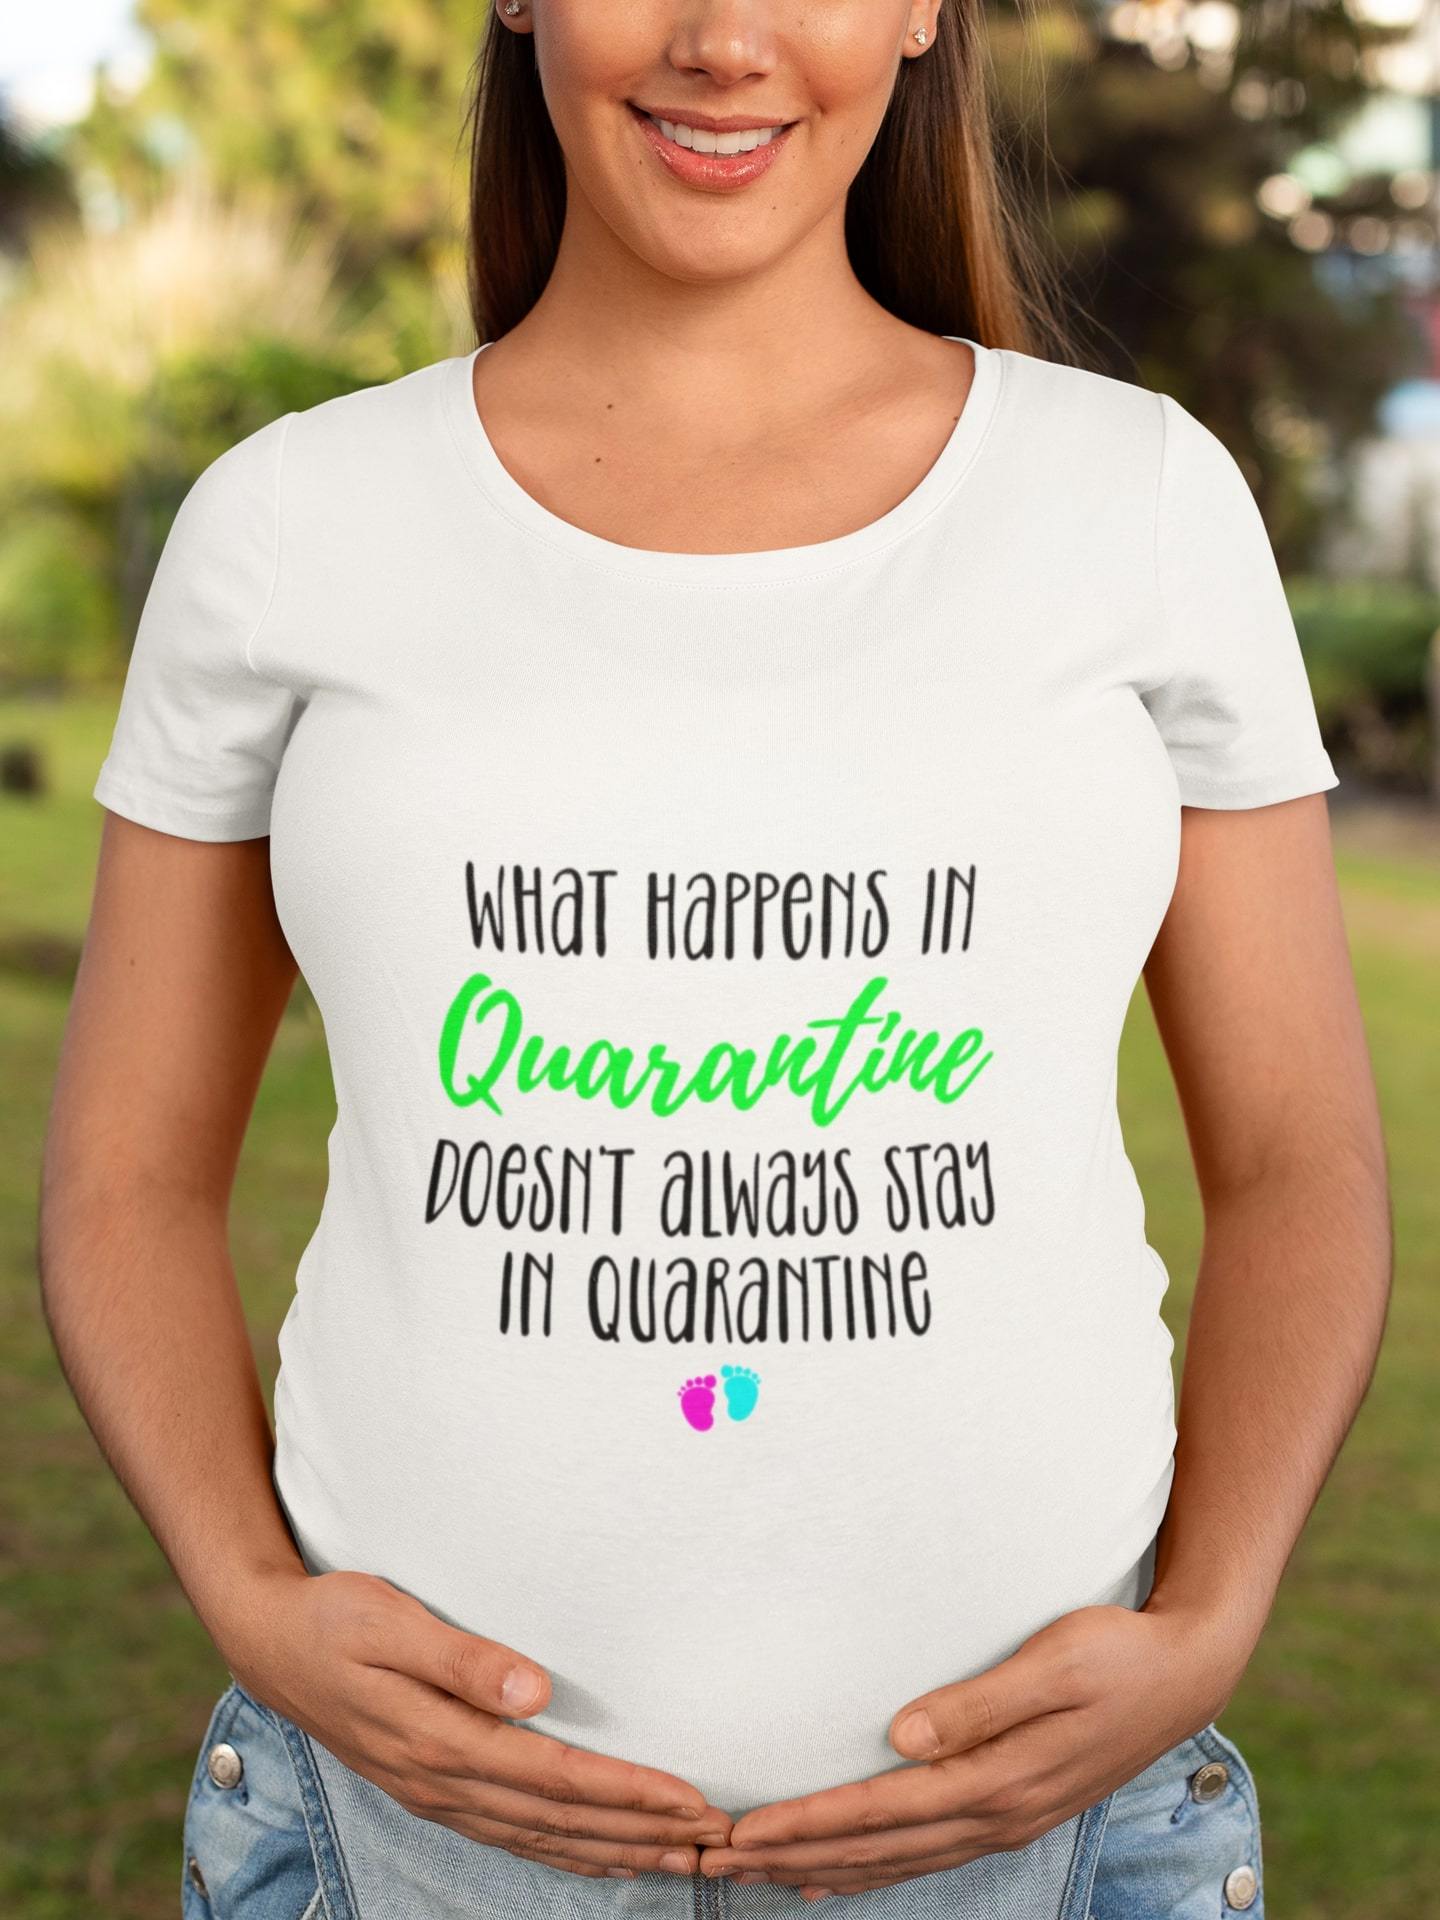 thelegalgang,What happens in Quarantine Graphic Maternity T shirt,WOMEN.